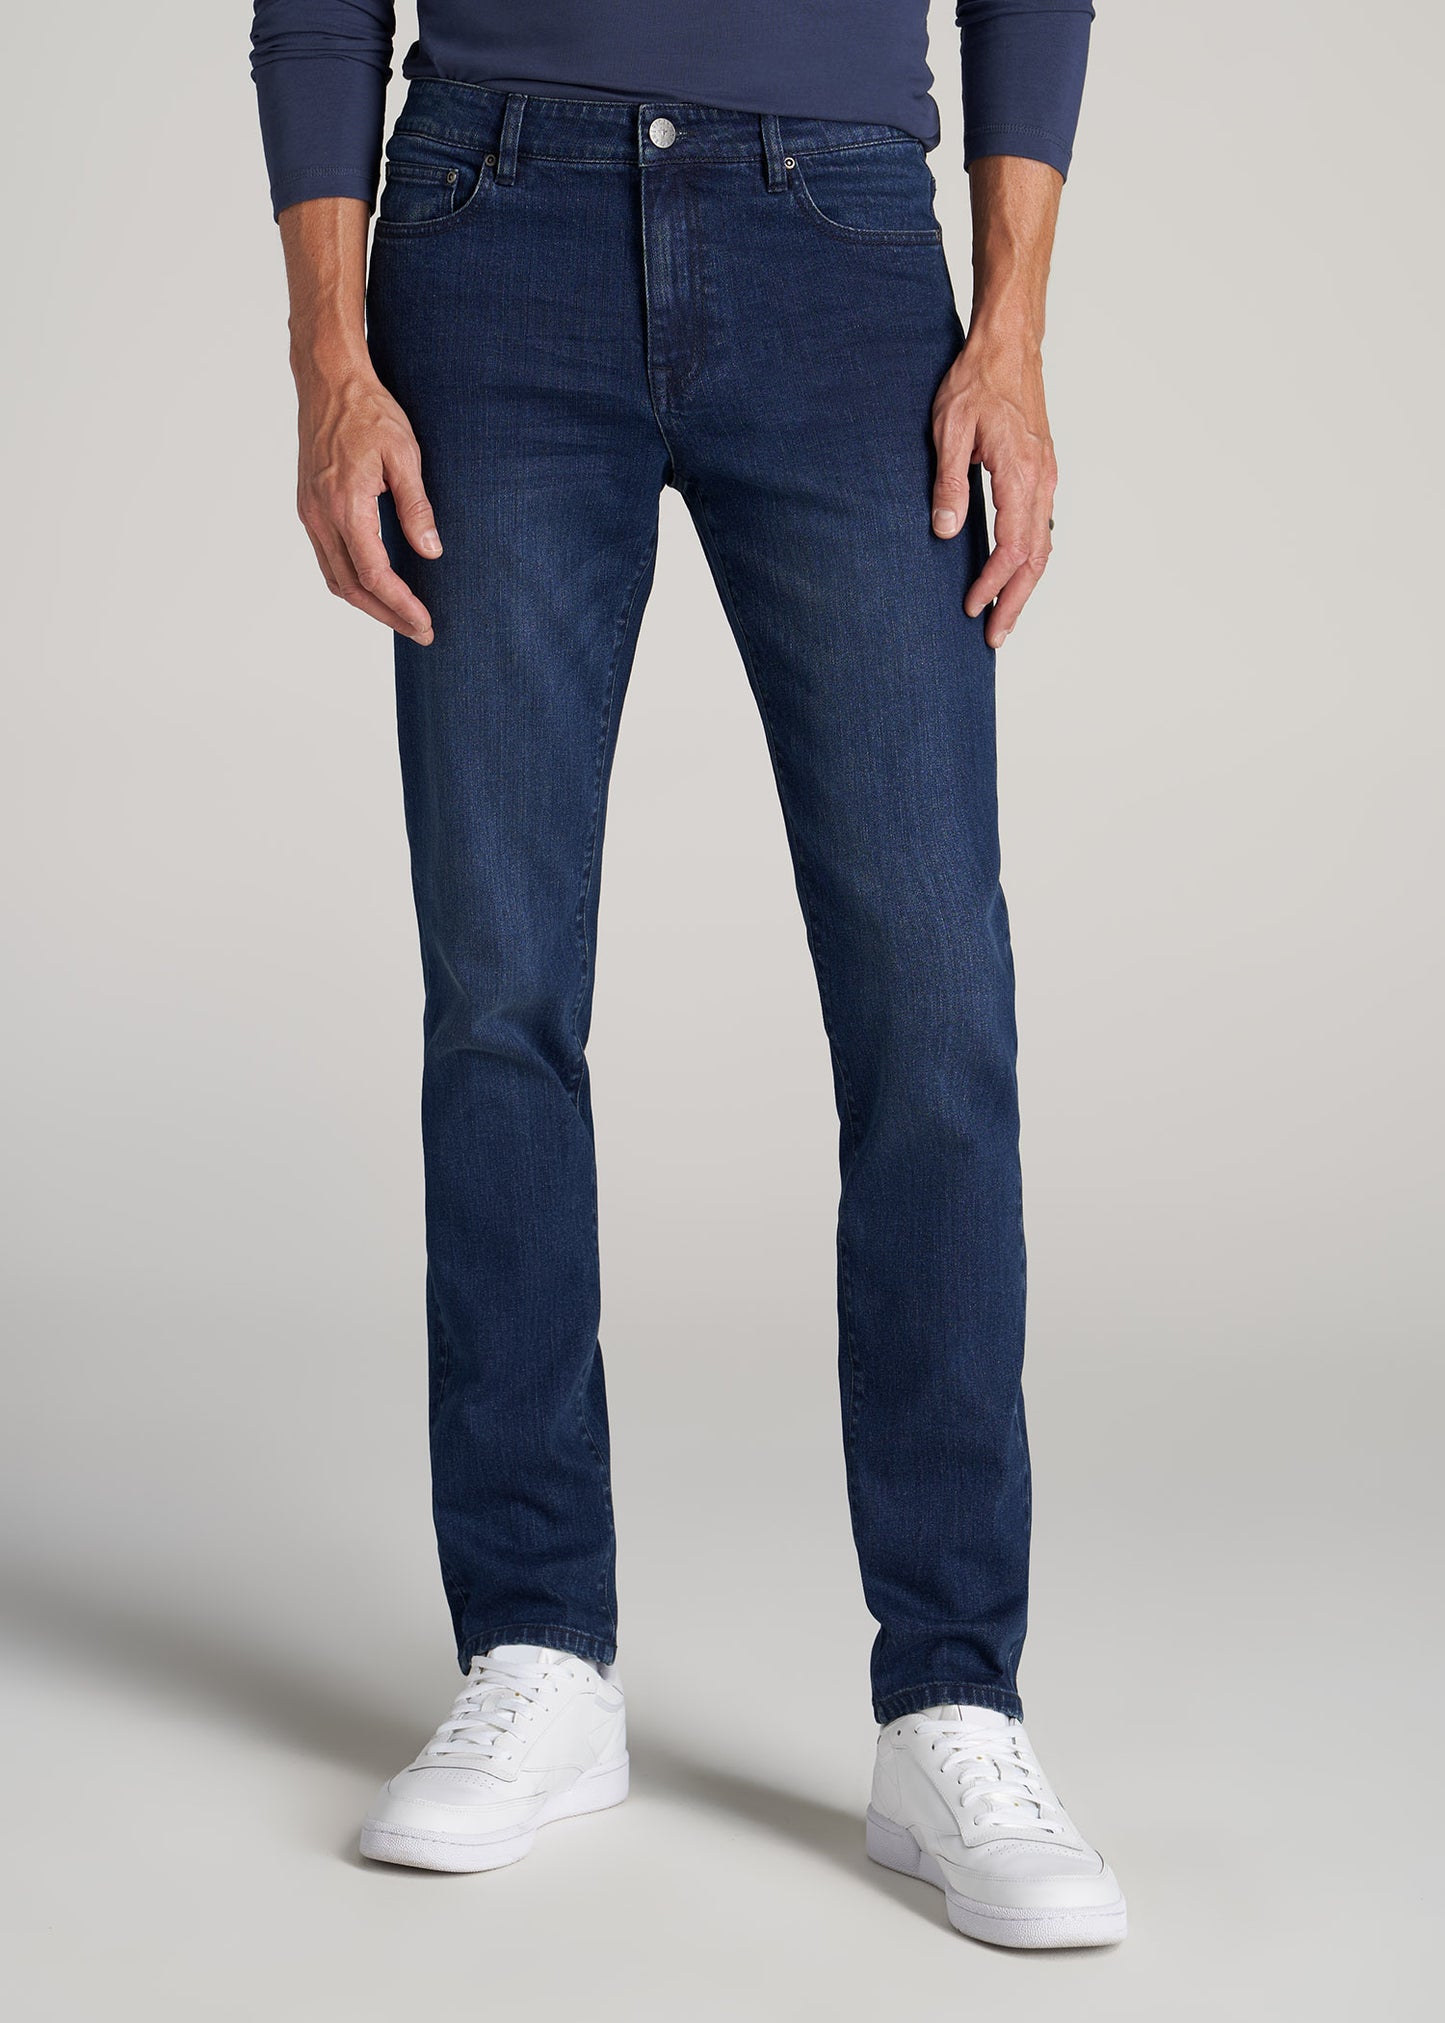 Dylan Slim Fit Jeans Retro Blue For Tall Men